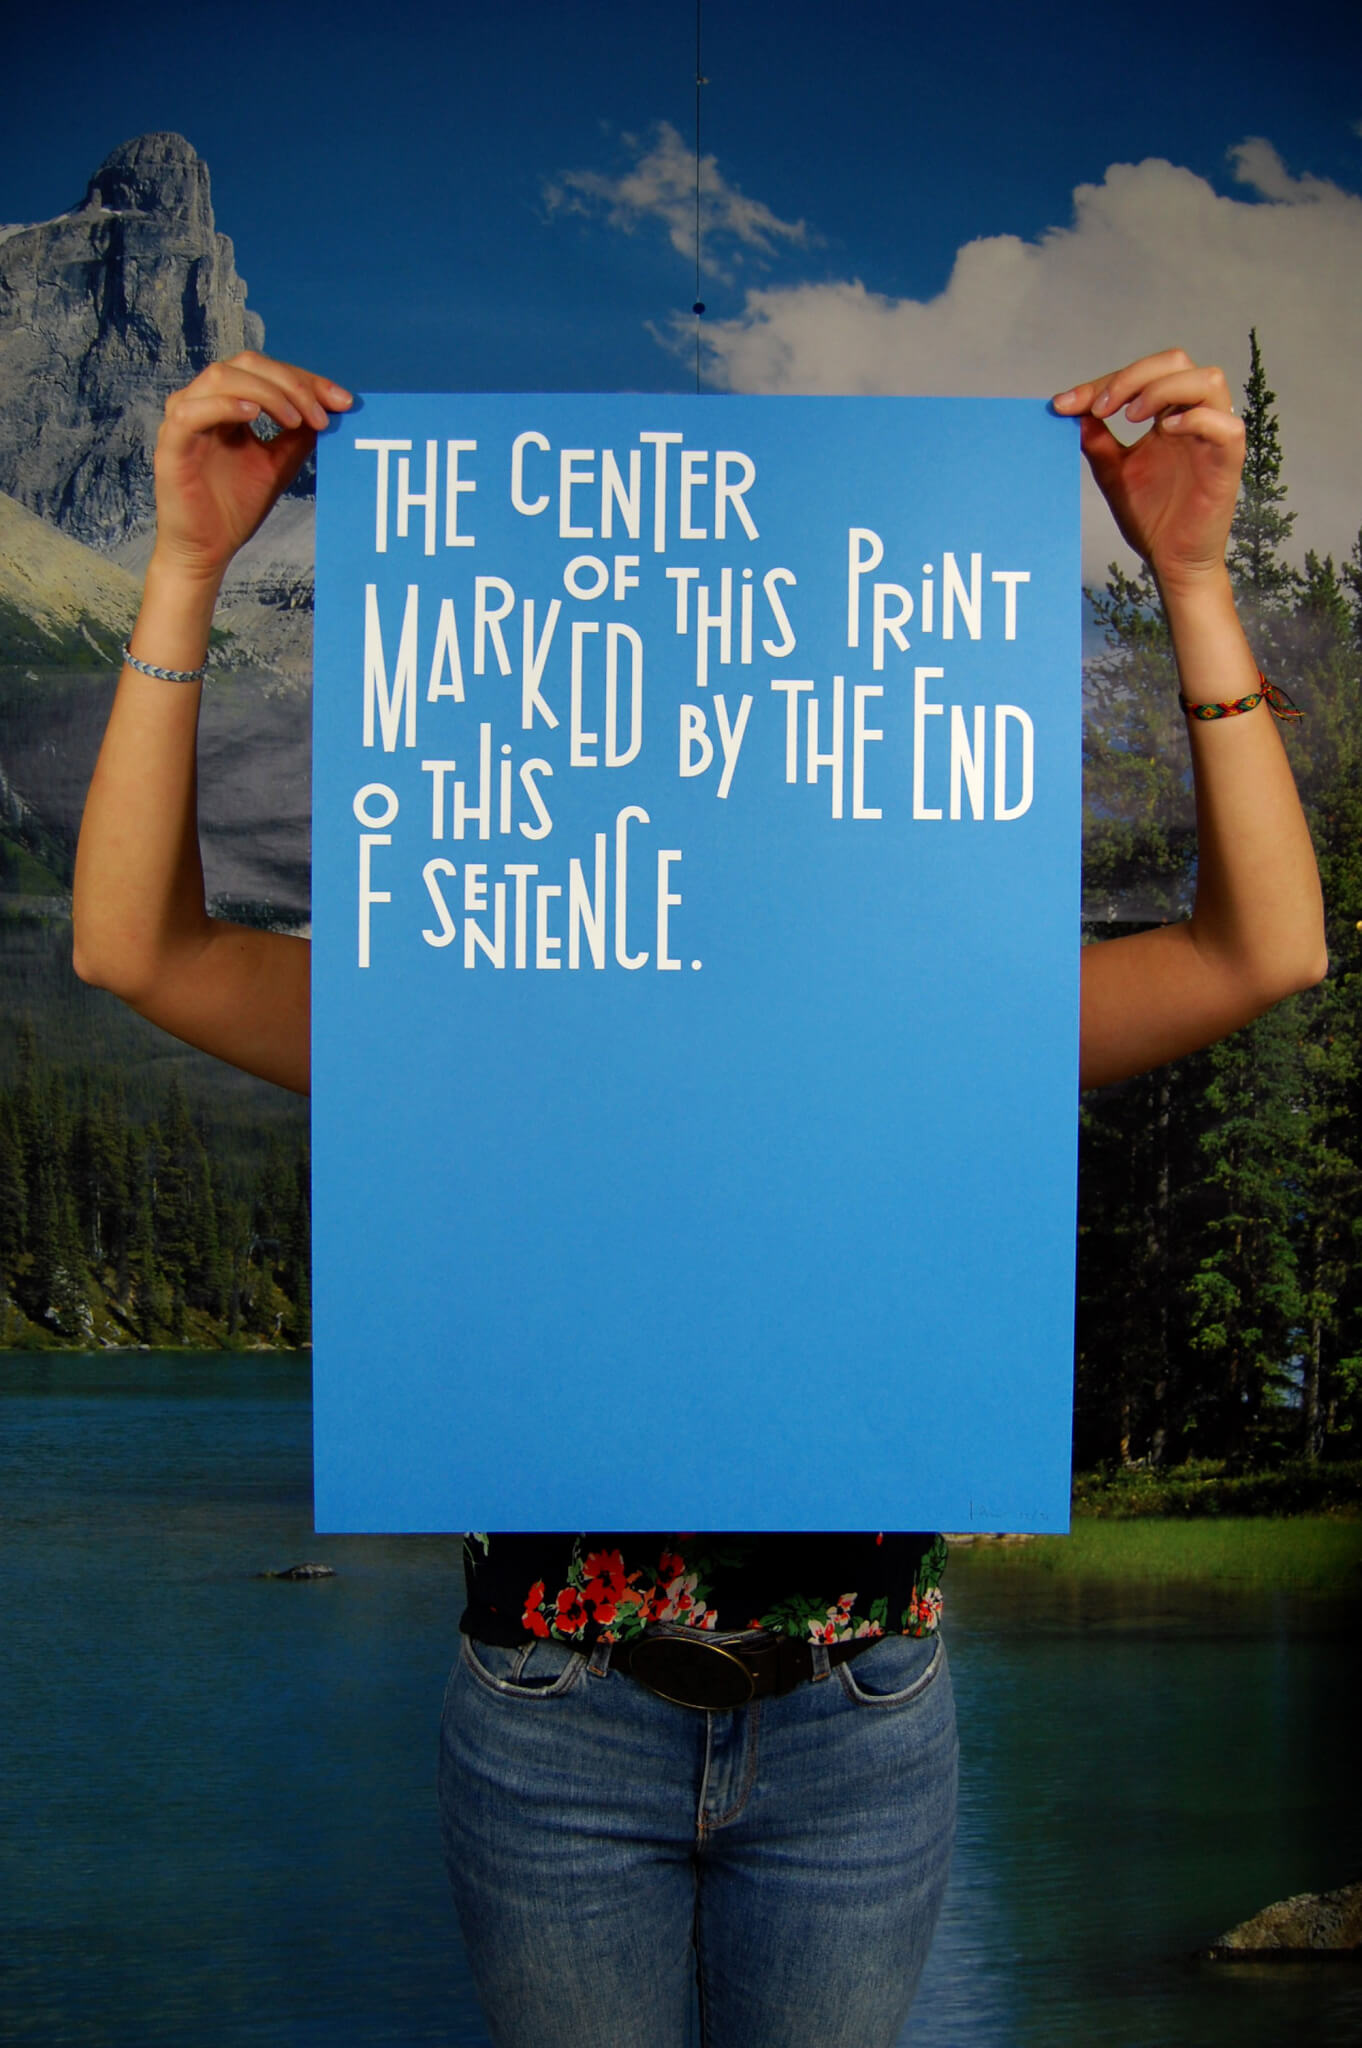 HELMUT SMITS – « The center of this print marked by the end of this sentence » – BLUE